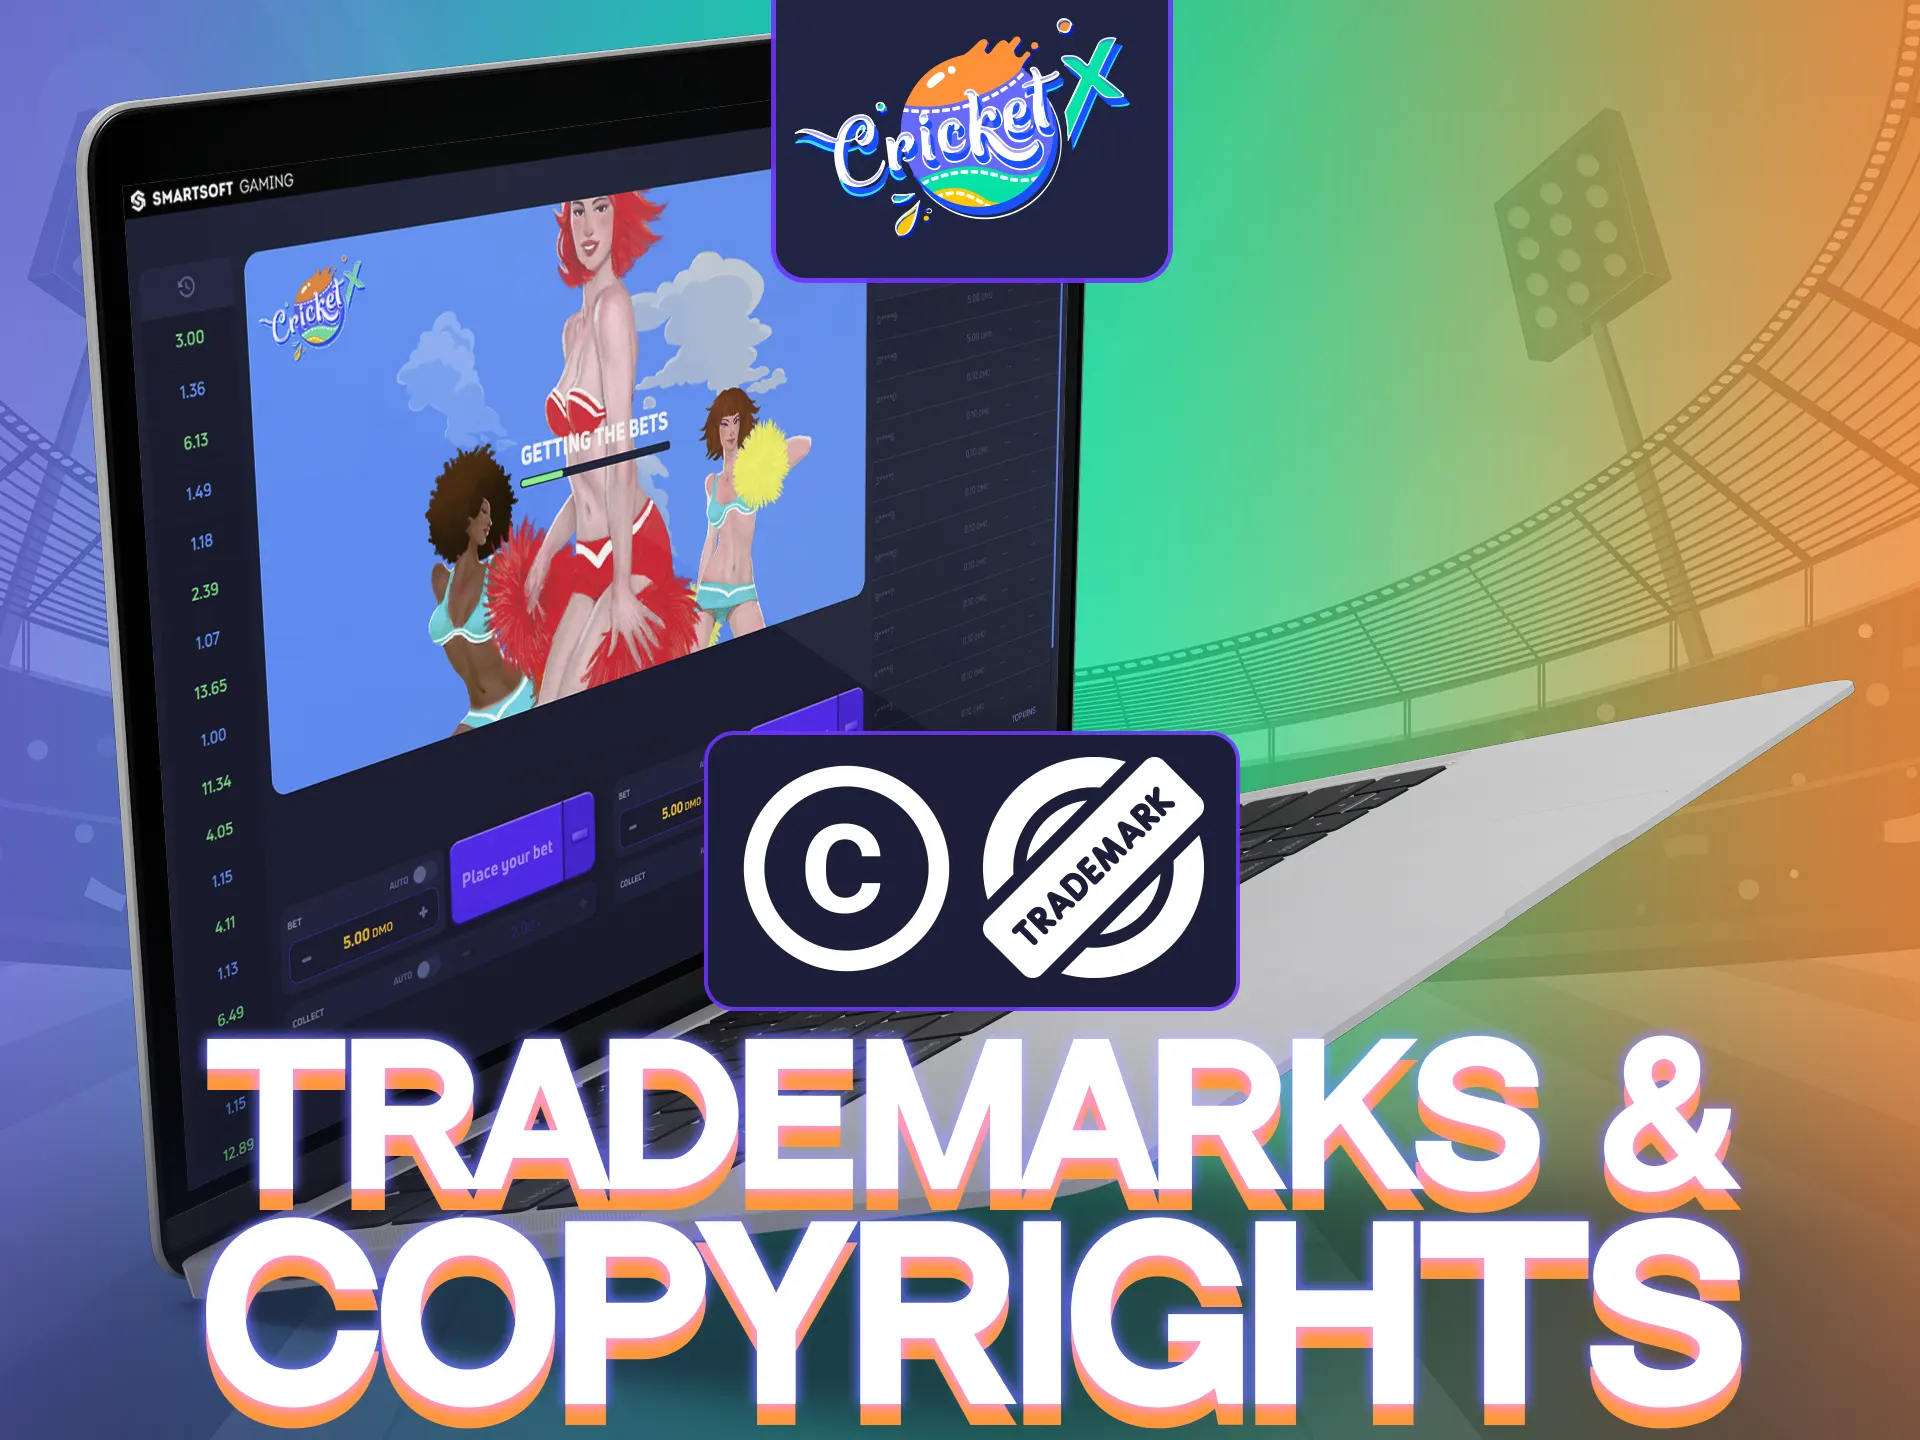 The Cricket-X name, logo, and trademark are under copyright protection.